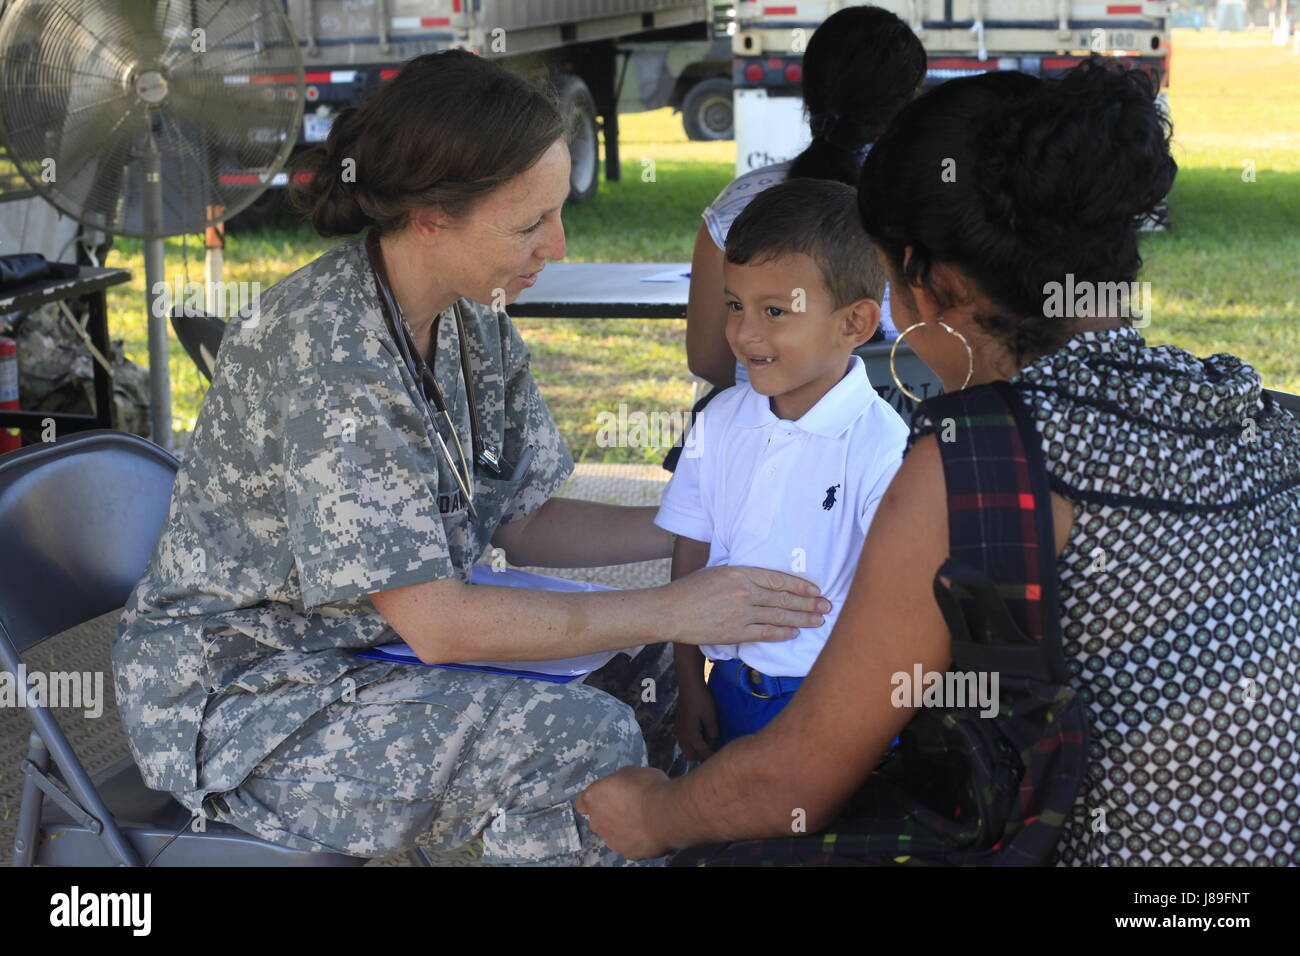 U.S. Army Lt. Col. Amy Surdam, with the Wyoming National Guard Medical Detachment, assess a patient's breathing at a medical readiness event during Beyond the Horizon 2017, in San Ignacio, Belize, May 15, 2017. BTH 2017 is a U.S. Southern Command-sponsored, Army South-led exercise designed to provide humanitarian and engineering services to communities in need, demonstrating U.S. support for Belize. (U.S. Army photo by Spc. Kelson Brooks) (RELEASED) Stock Photo